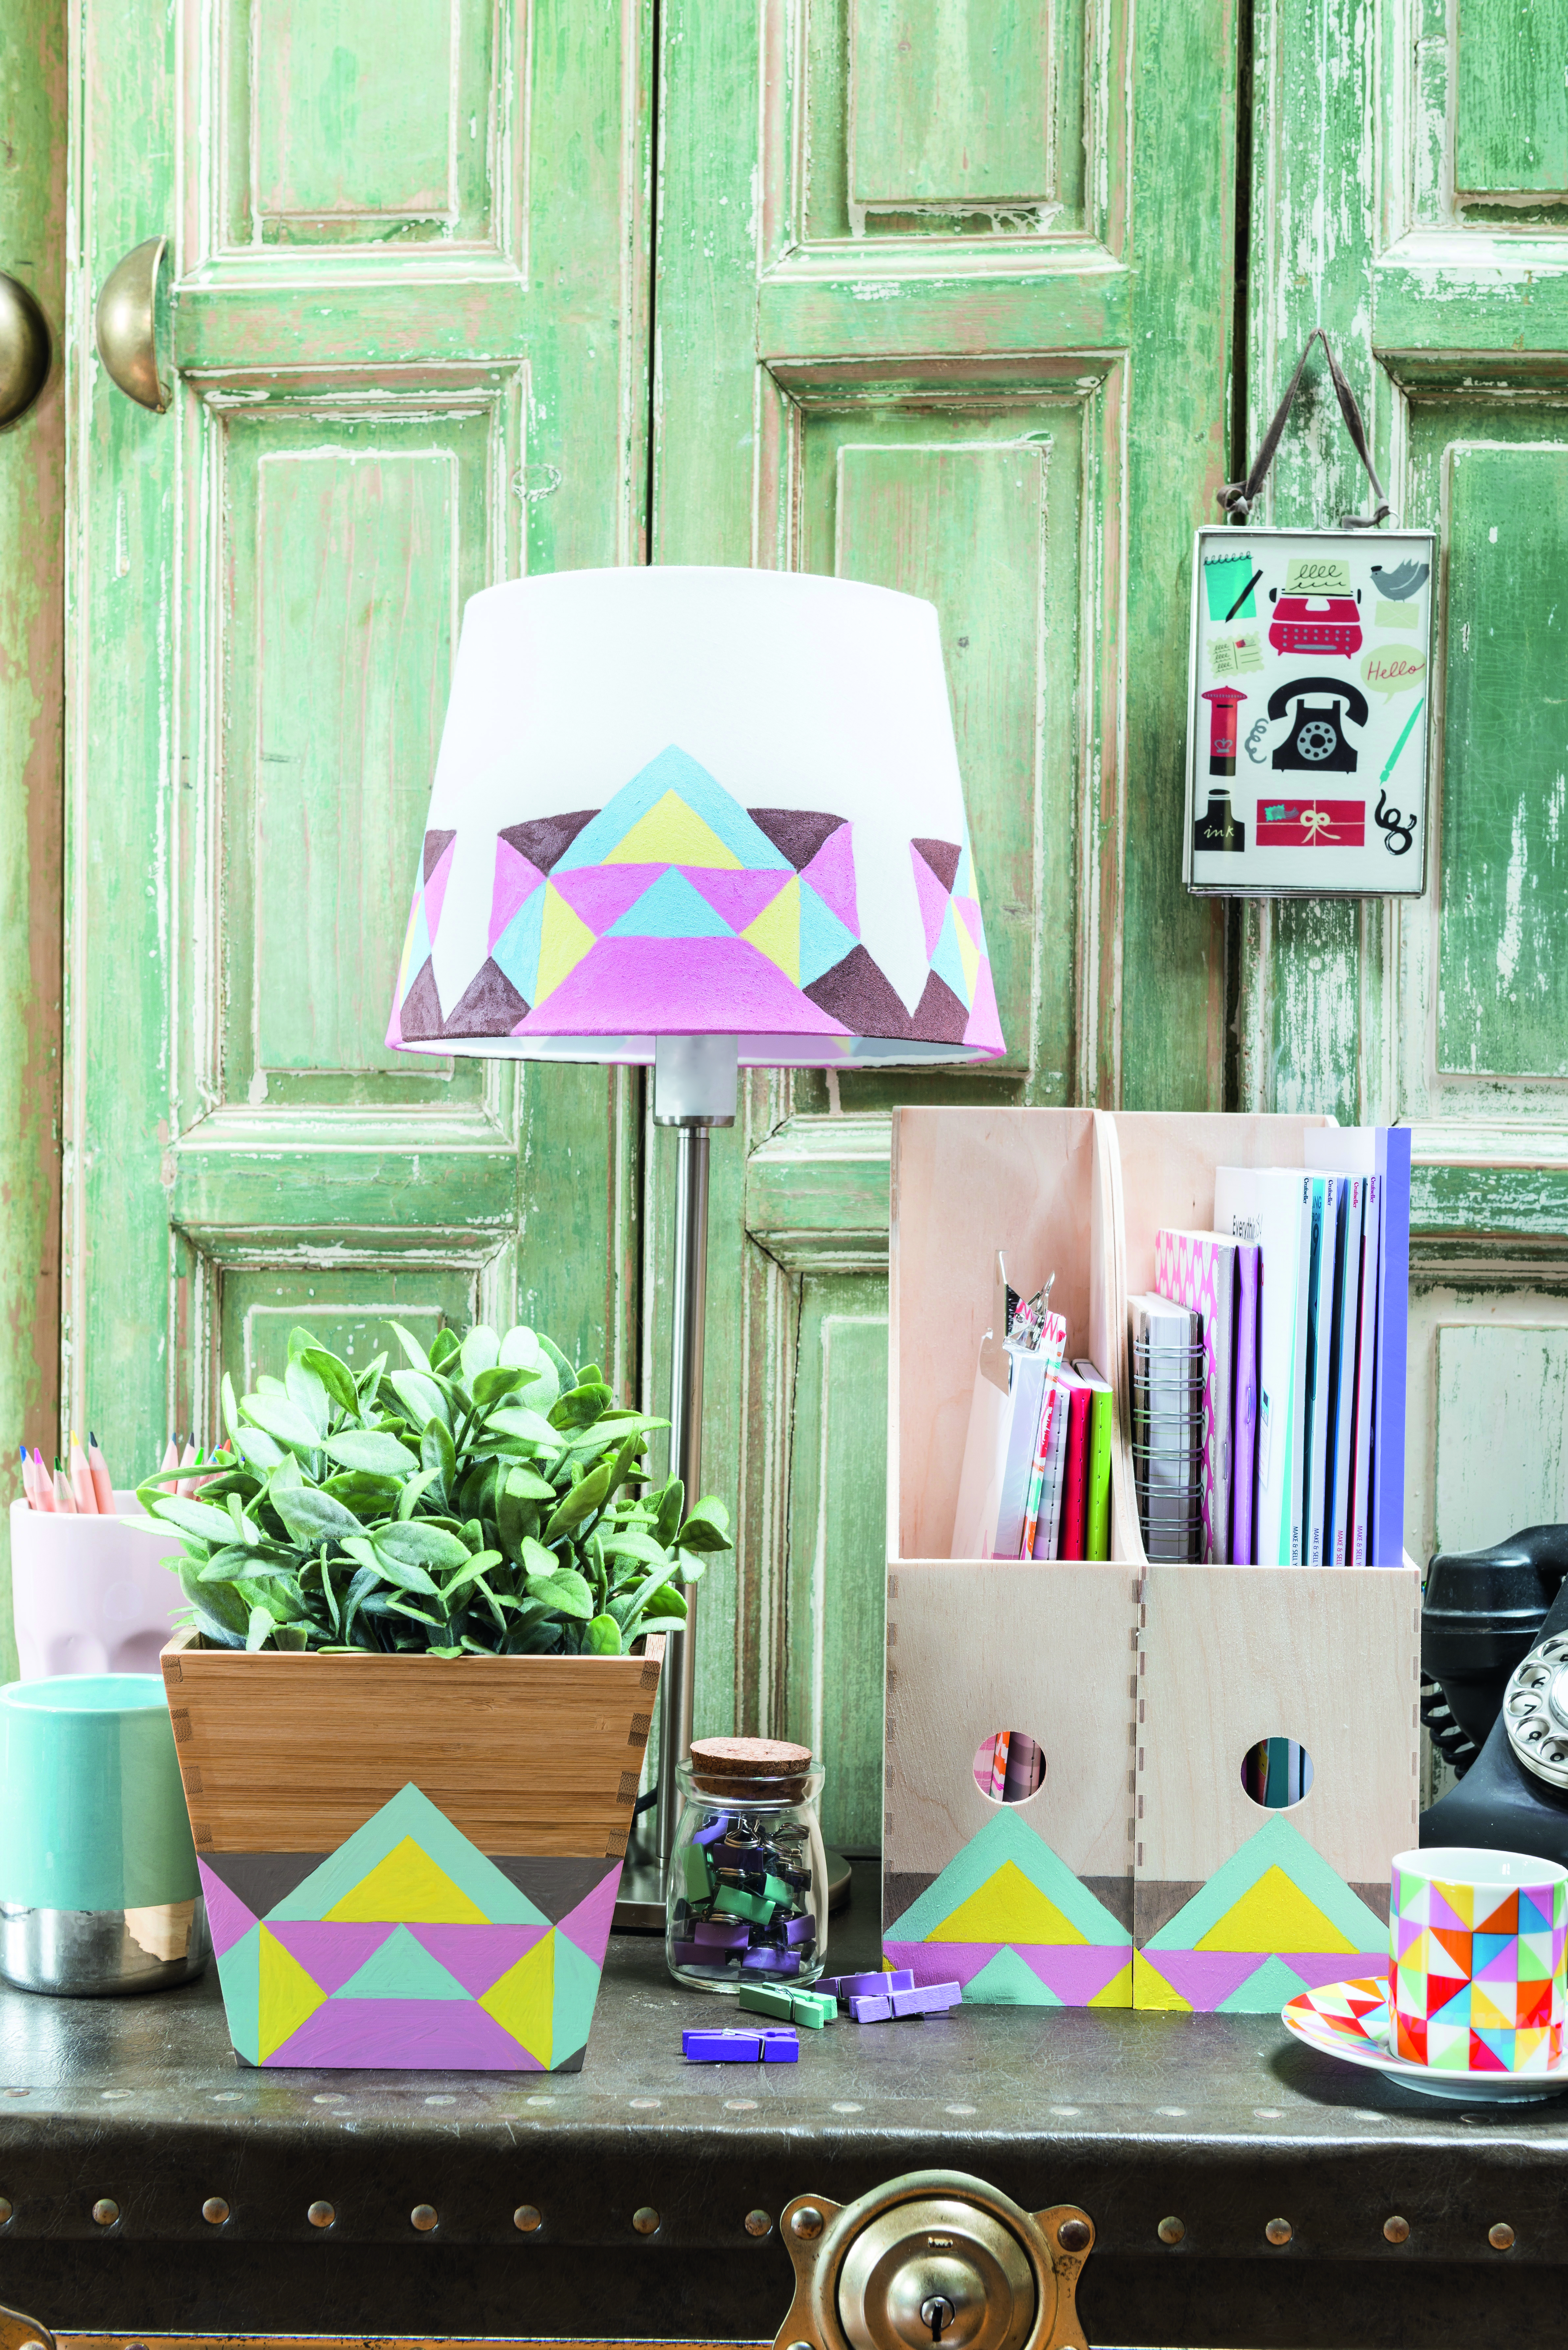 How to paint geometric patterns